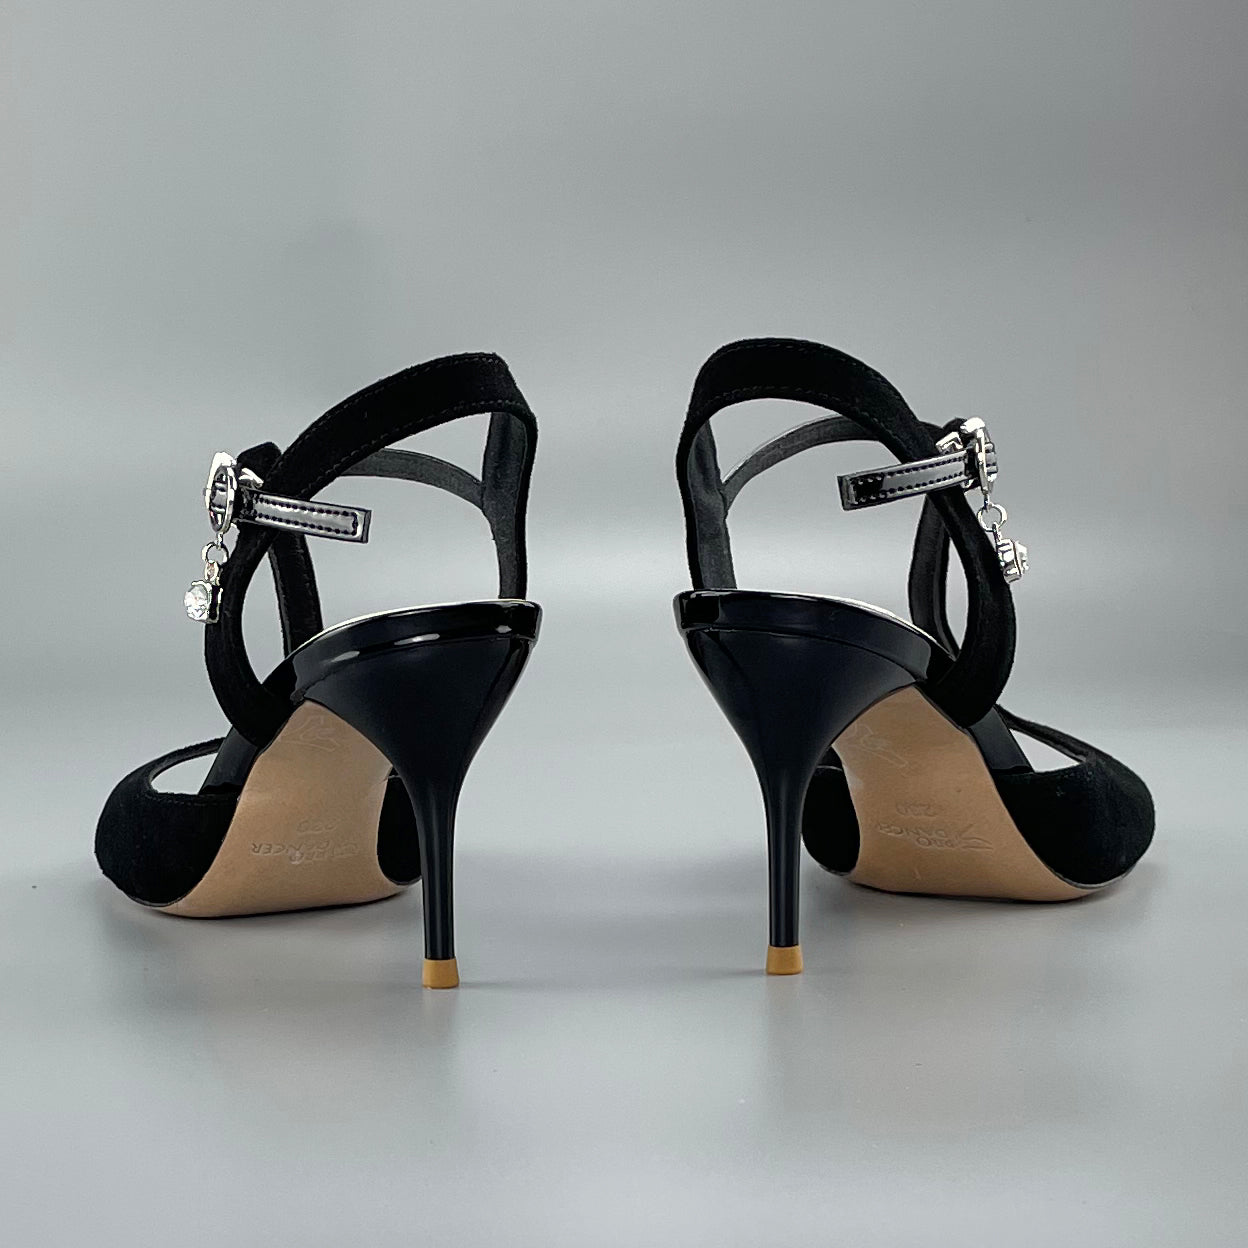 Pro Dancer open-toe and open-back Argentine Tango shoes with high salsa heels and hard leather sole sandals in black (PD-9046A)9